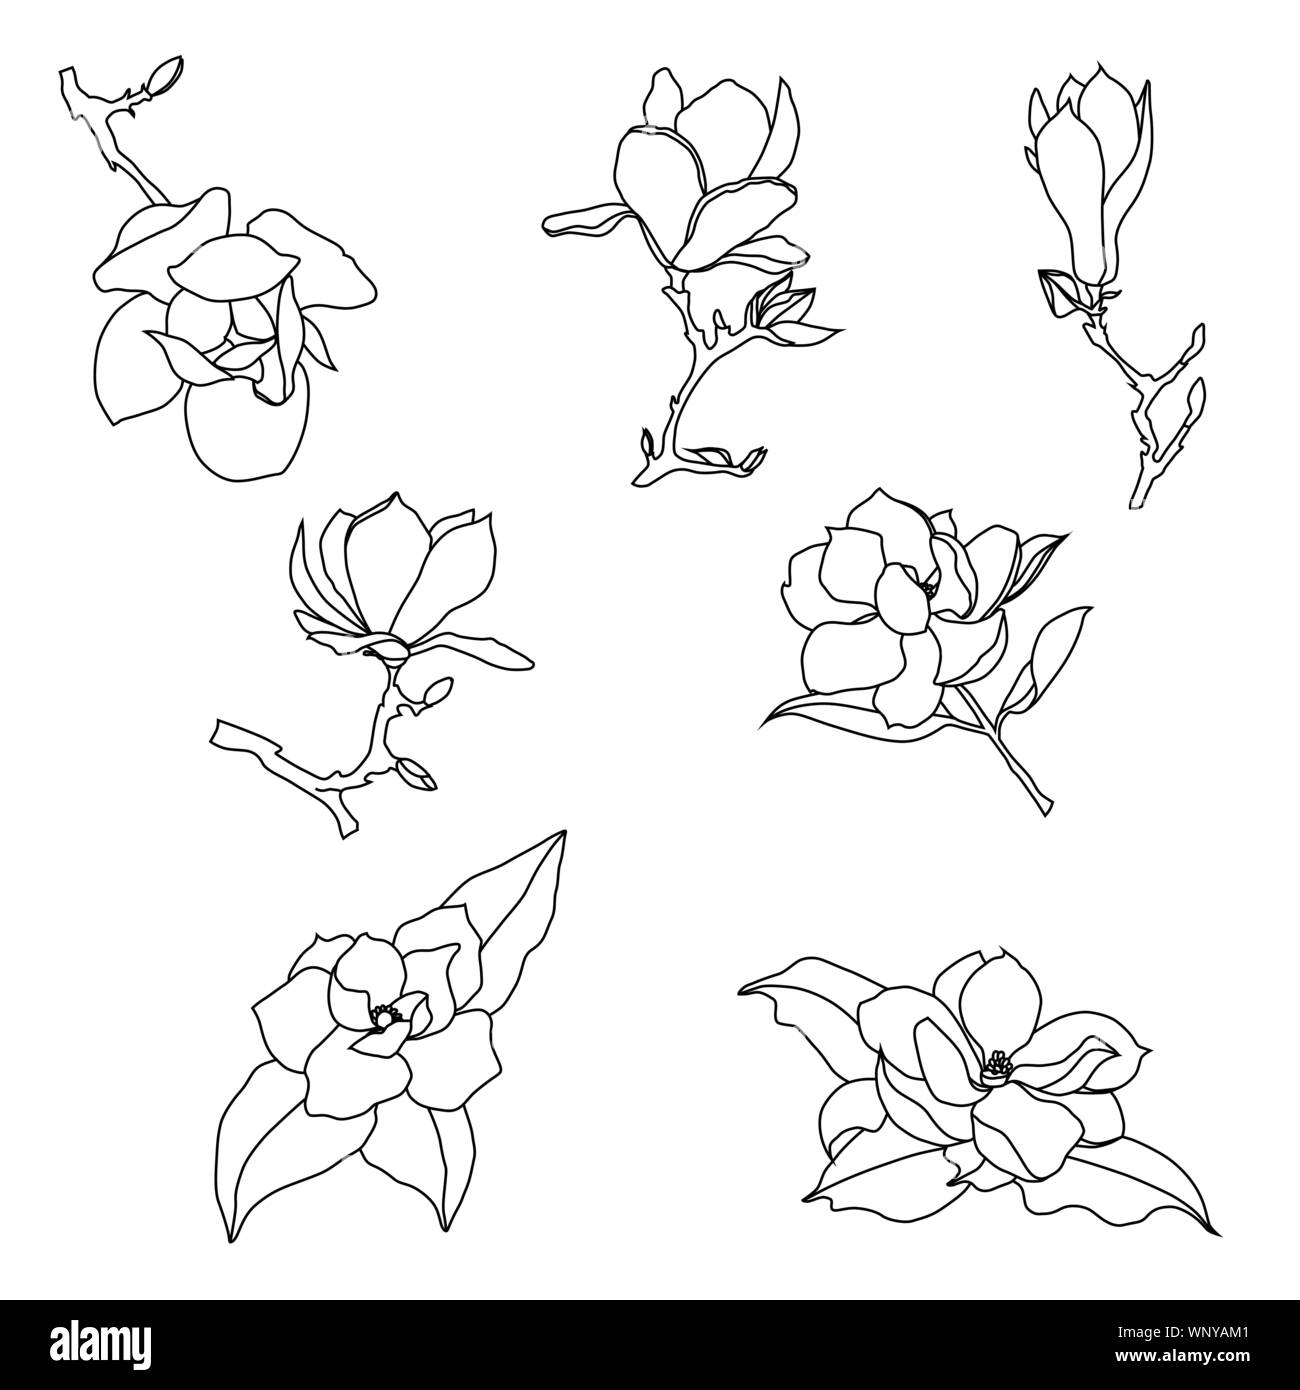 Set of contour drawings of magnolia flowers on a white background. Southern plants silhouettes vector illustration. Stock Vector